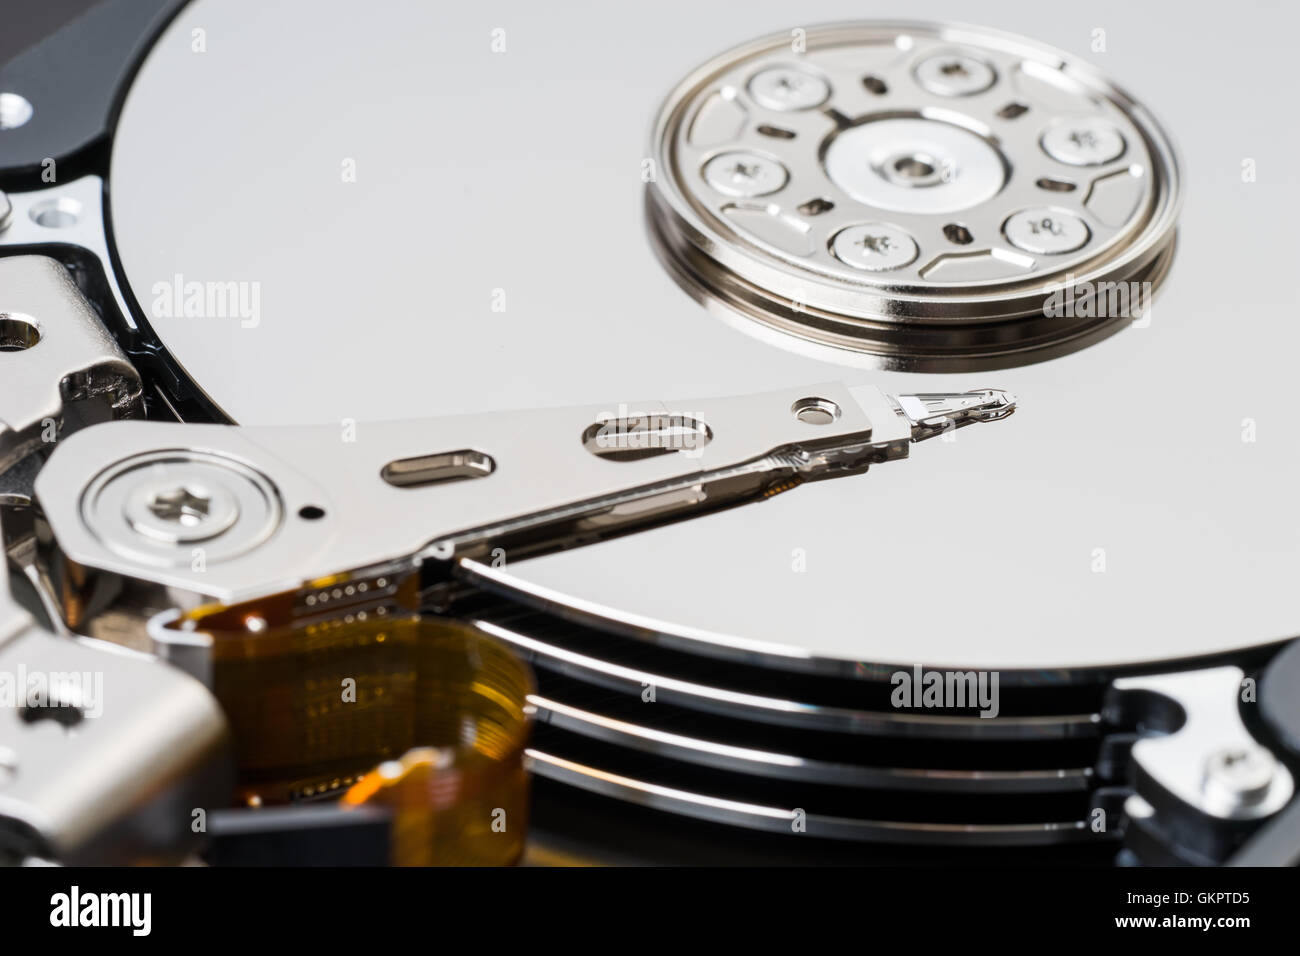 Detailed view of the inside of a hard disk drive, close-up Stock Photo